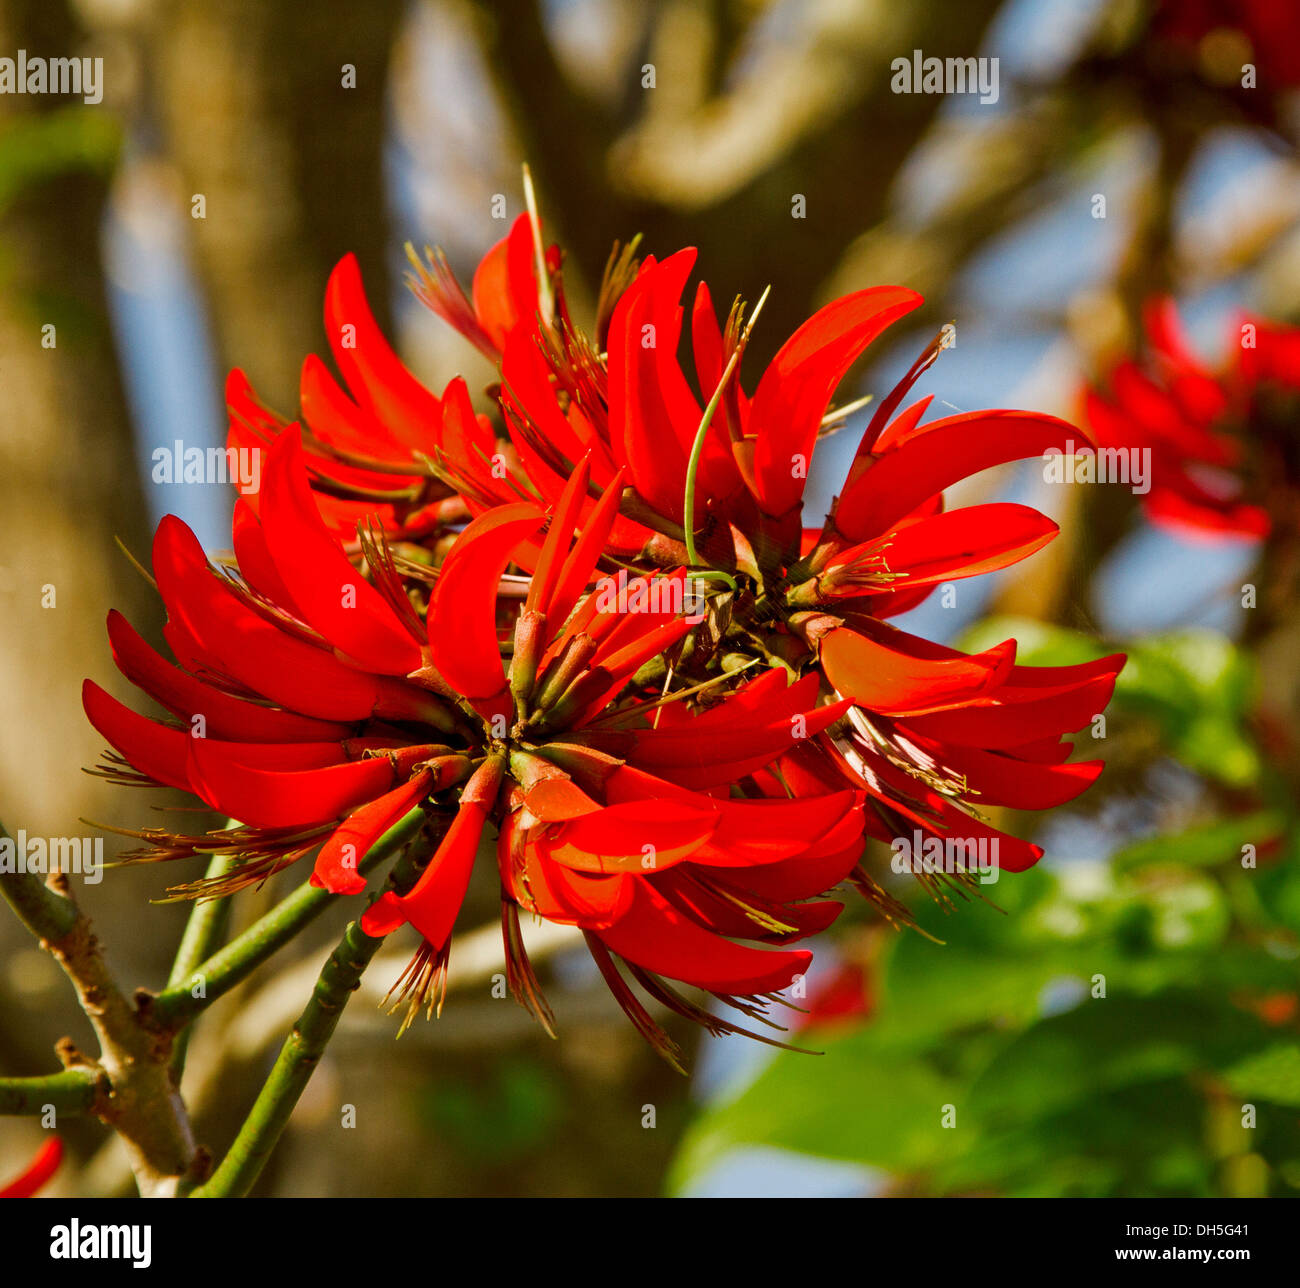 Cluster of bright red flowers of coral tree - Erythrina bidwillii against background of green foliage and blue sky Stock Photo